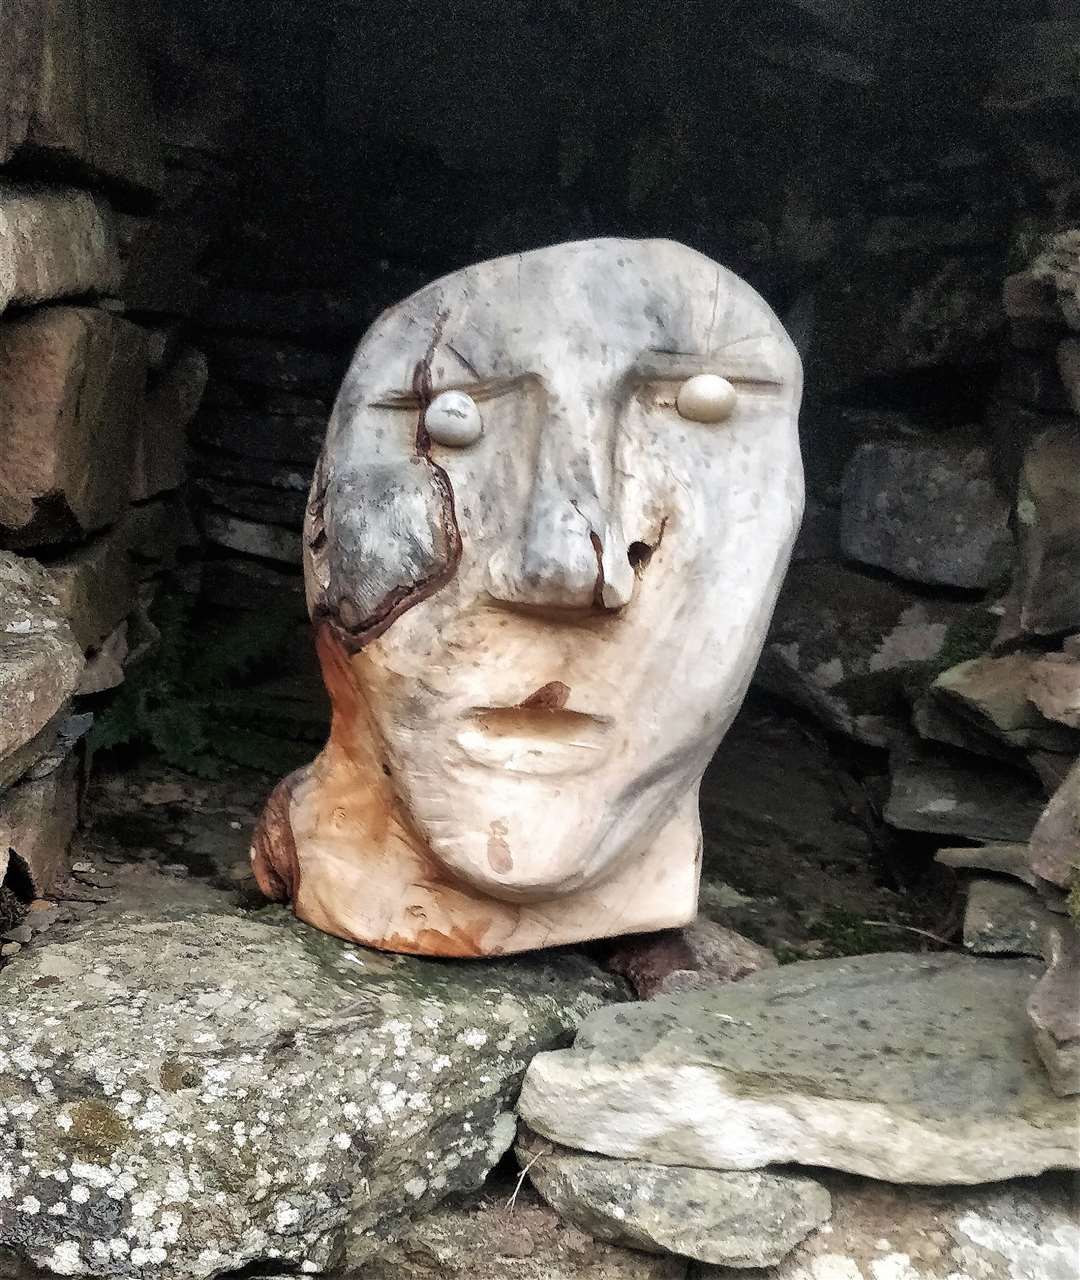 The Ousdale Mannie in his niche at the broch.The carving was inspired by the Ballachulish Goddess, the oldest intact wooden object found in Scotland and was discovered in a peat bog. Pictures: CBP